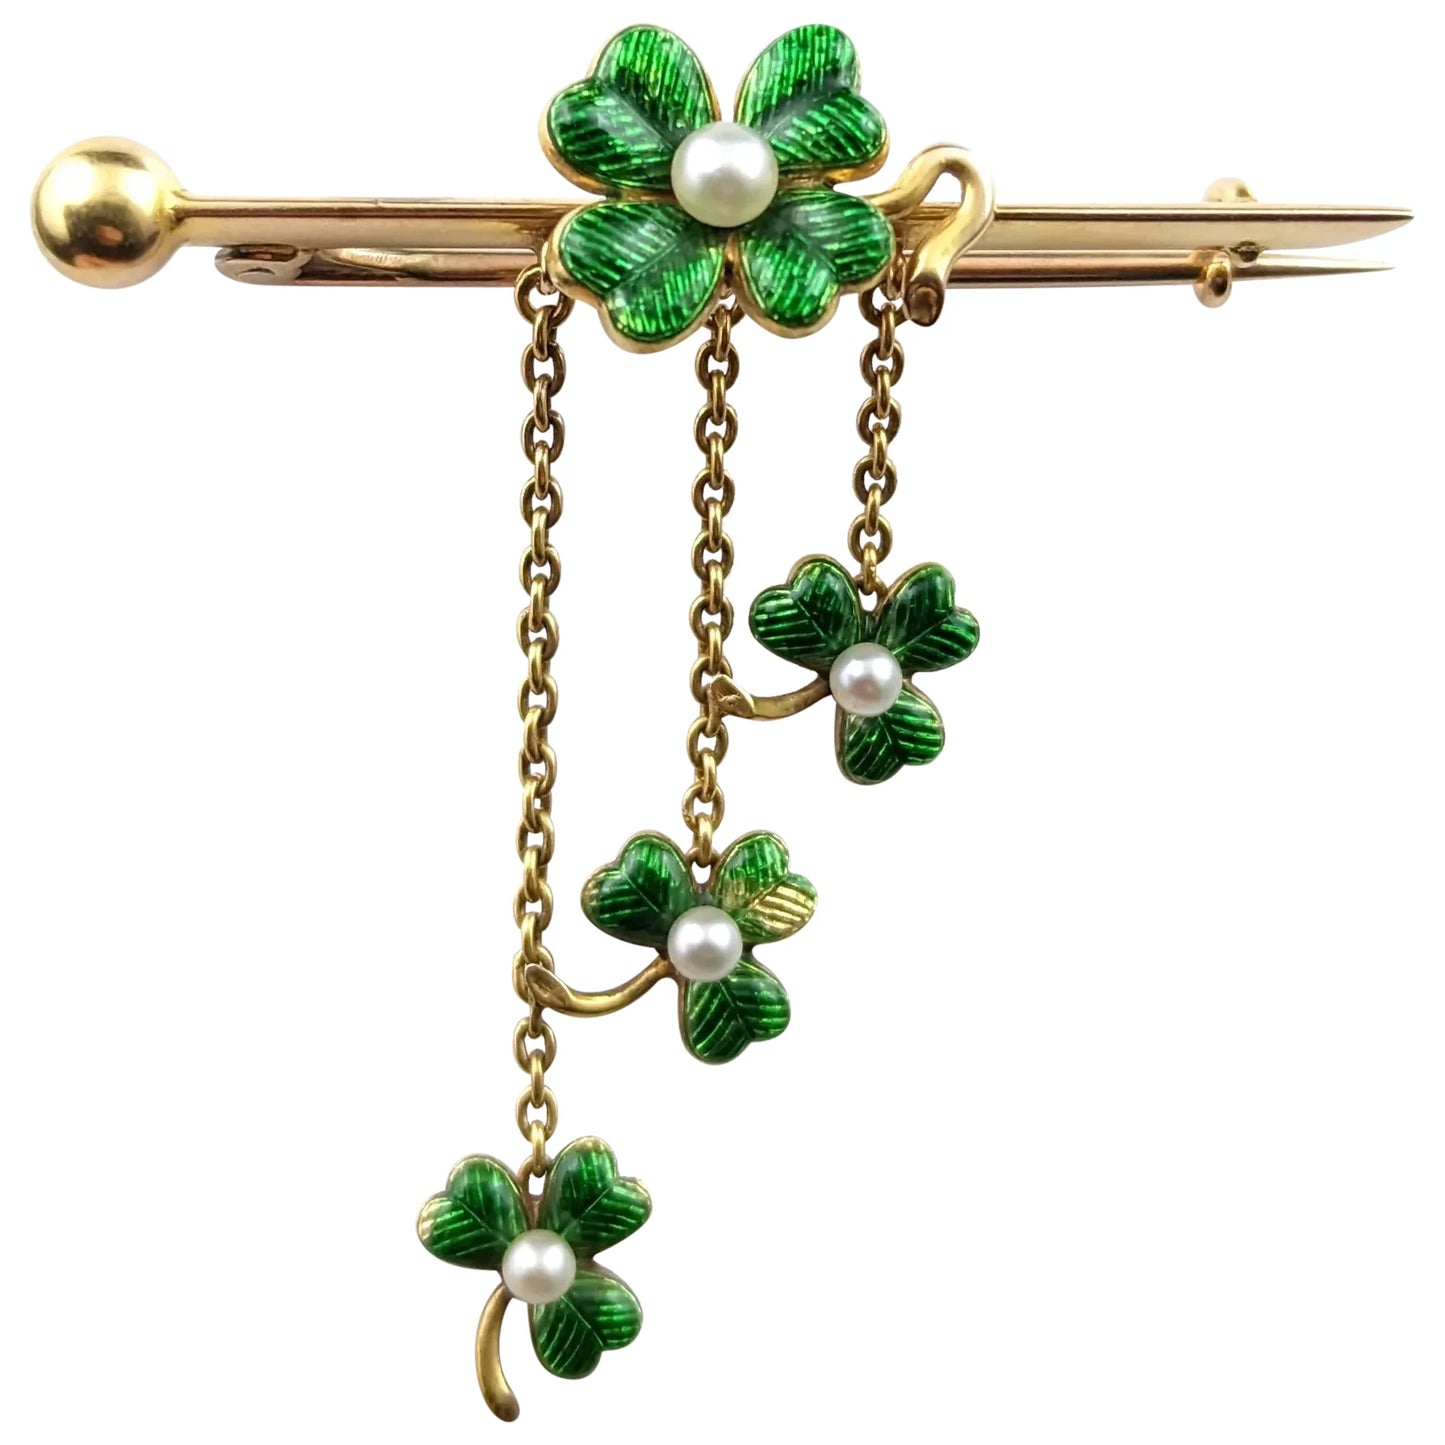 Antique Shamrock brooch, 15ct gold, Guilloche enamel and seed pearl